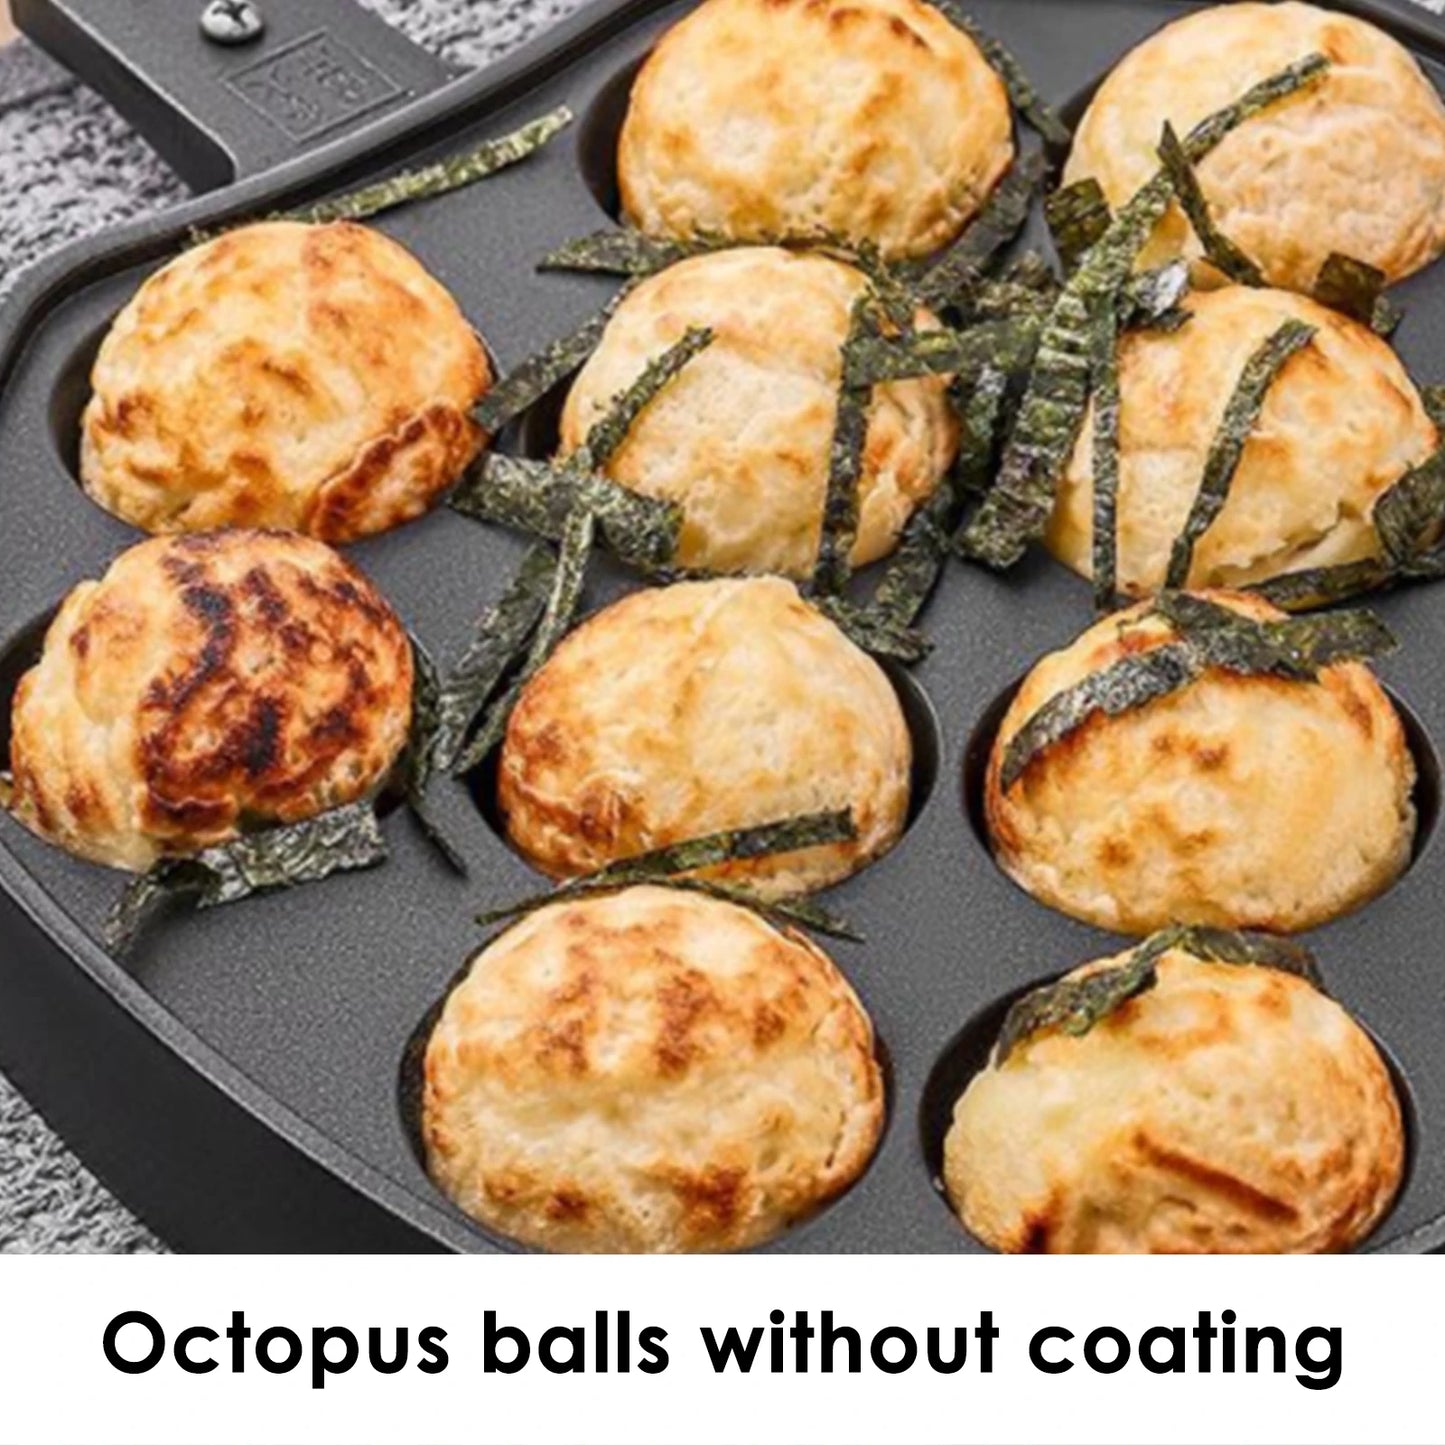 12 Holes Takoyaki Maker Grill Pan Octopus Ball Plate Home Cooking Baking Forms Mold Tray Baking Pan For Kitchen Tools